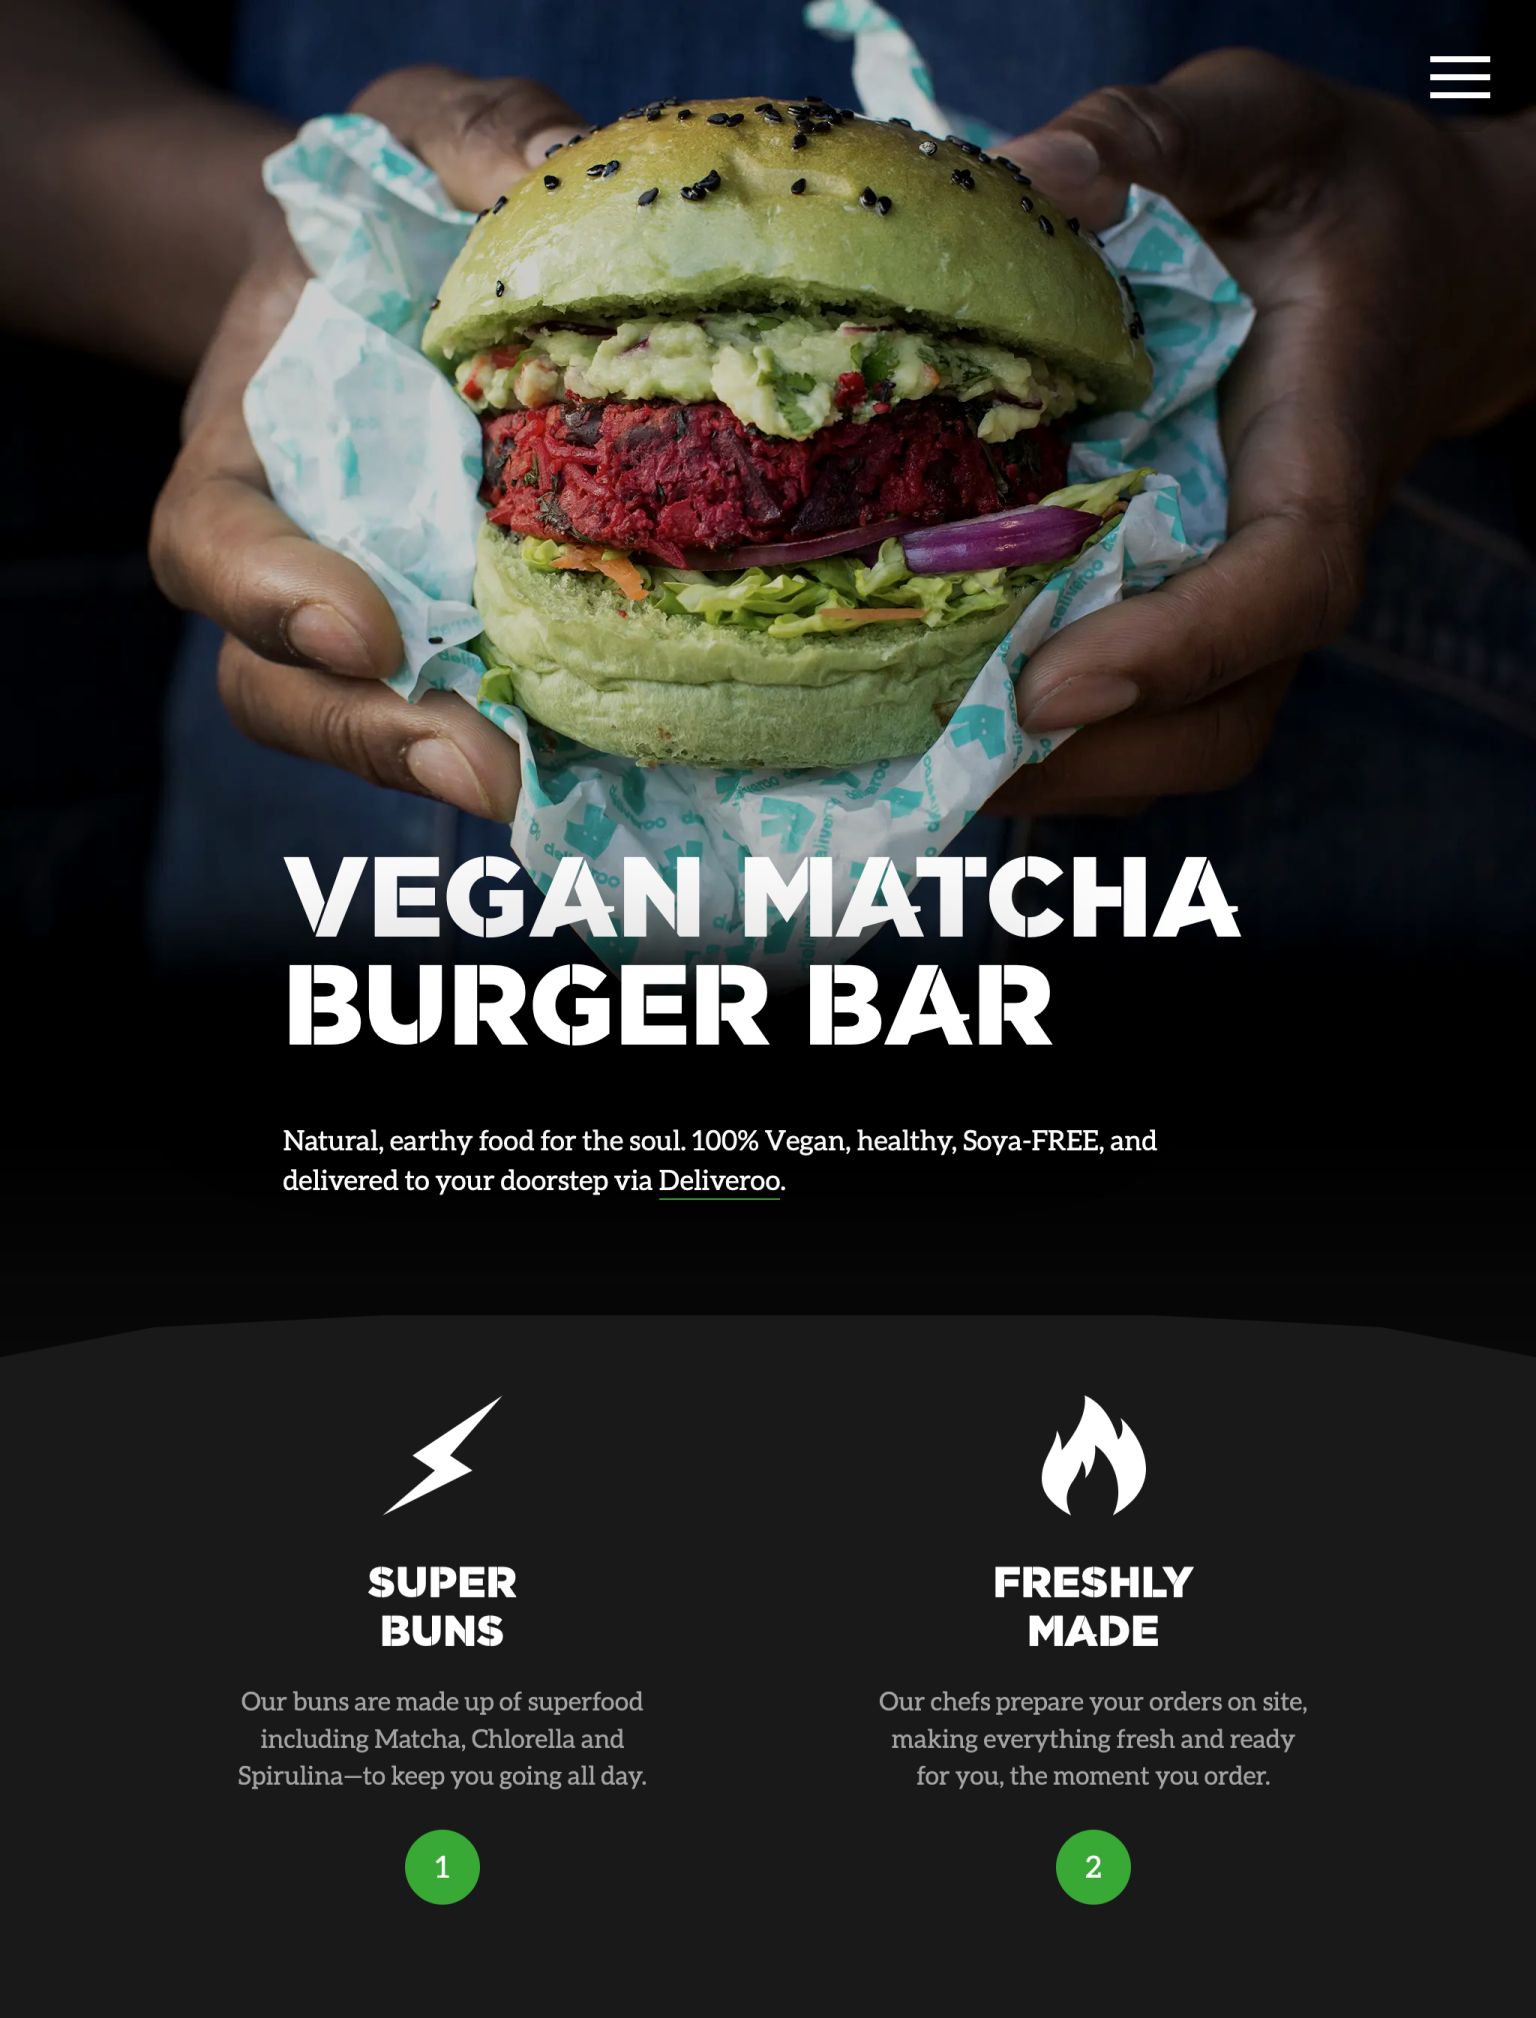 Vegan Matcha Burger website homepage on tablet. A mobile menu is shown in the top right with a large hero image of a green matcha burger with large stencilled text, along with some bullet points.